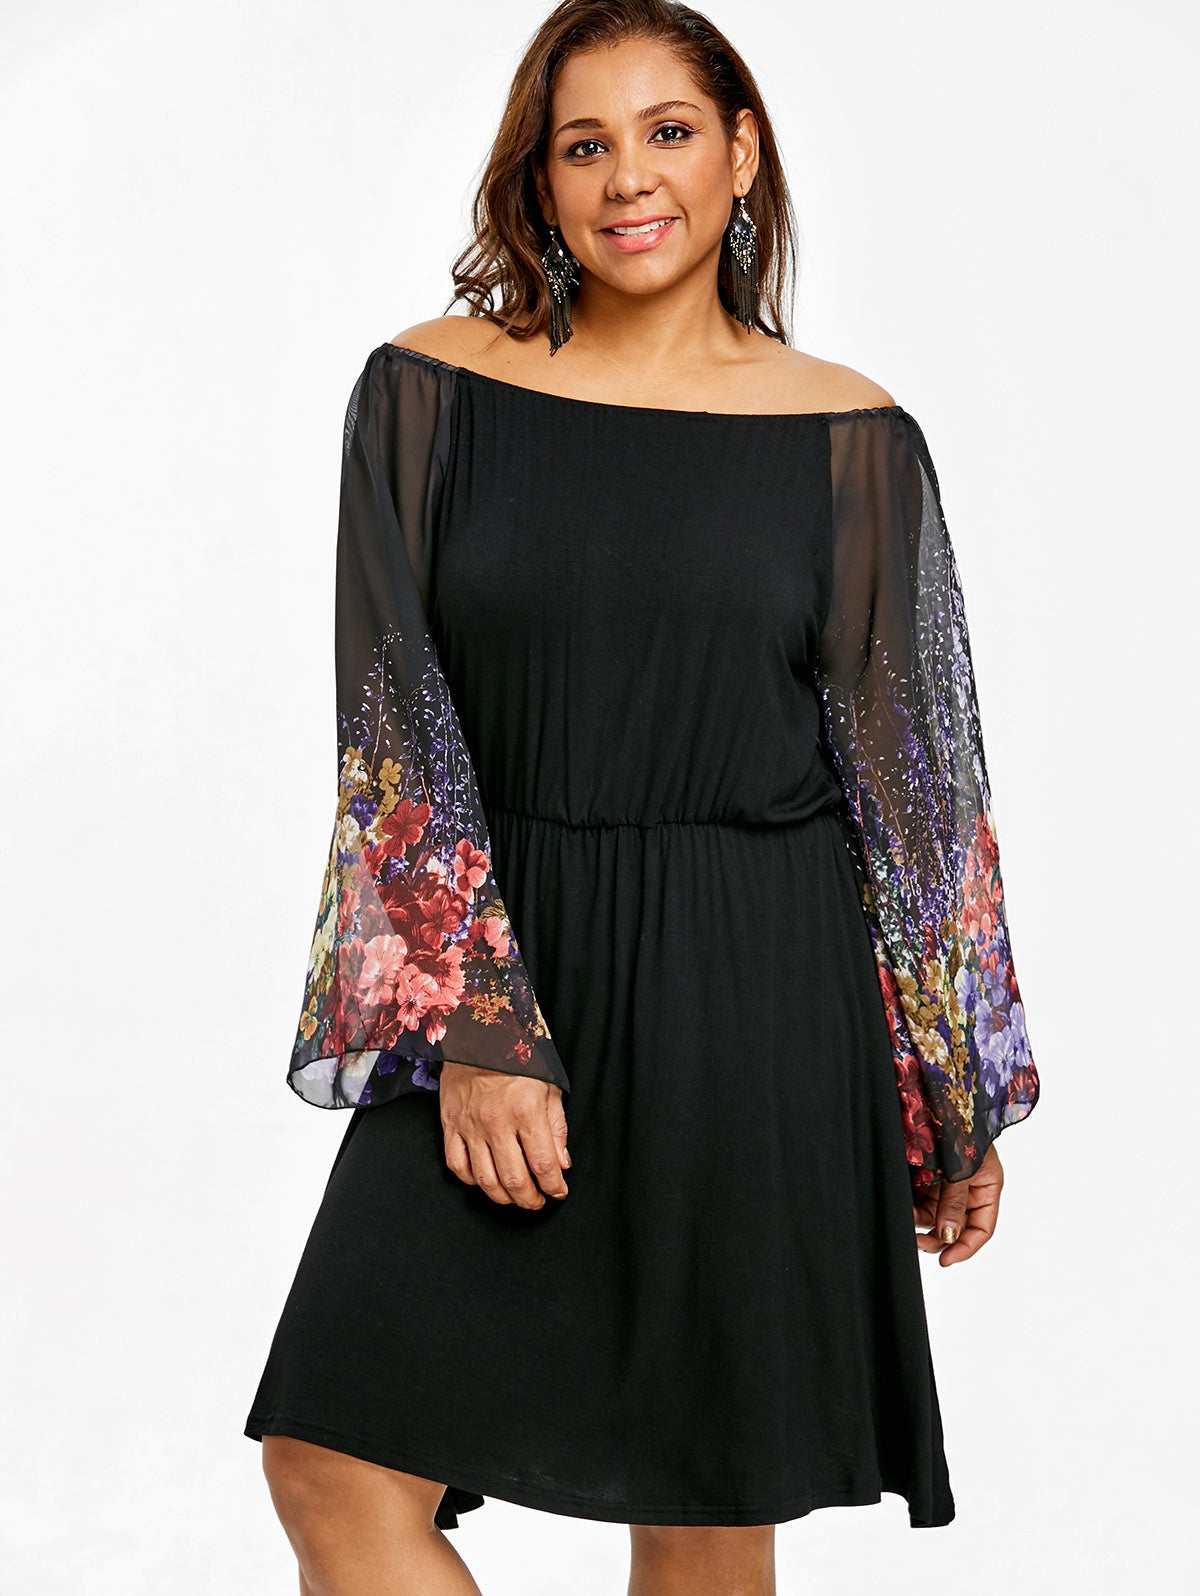 Plus Size Flower Printed Party Dress - Plushlegacy